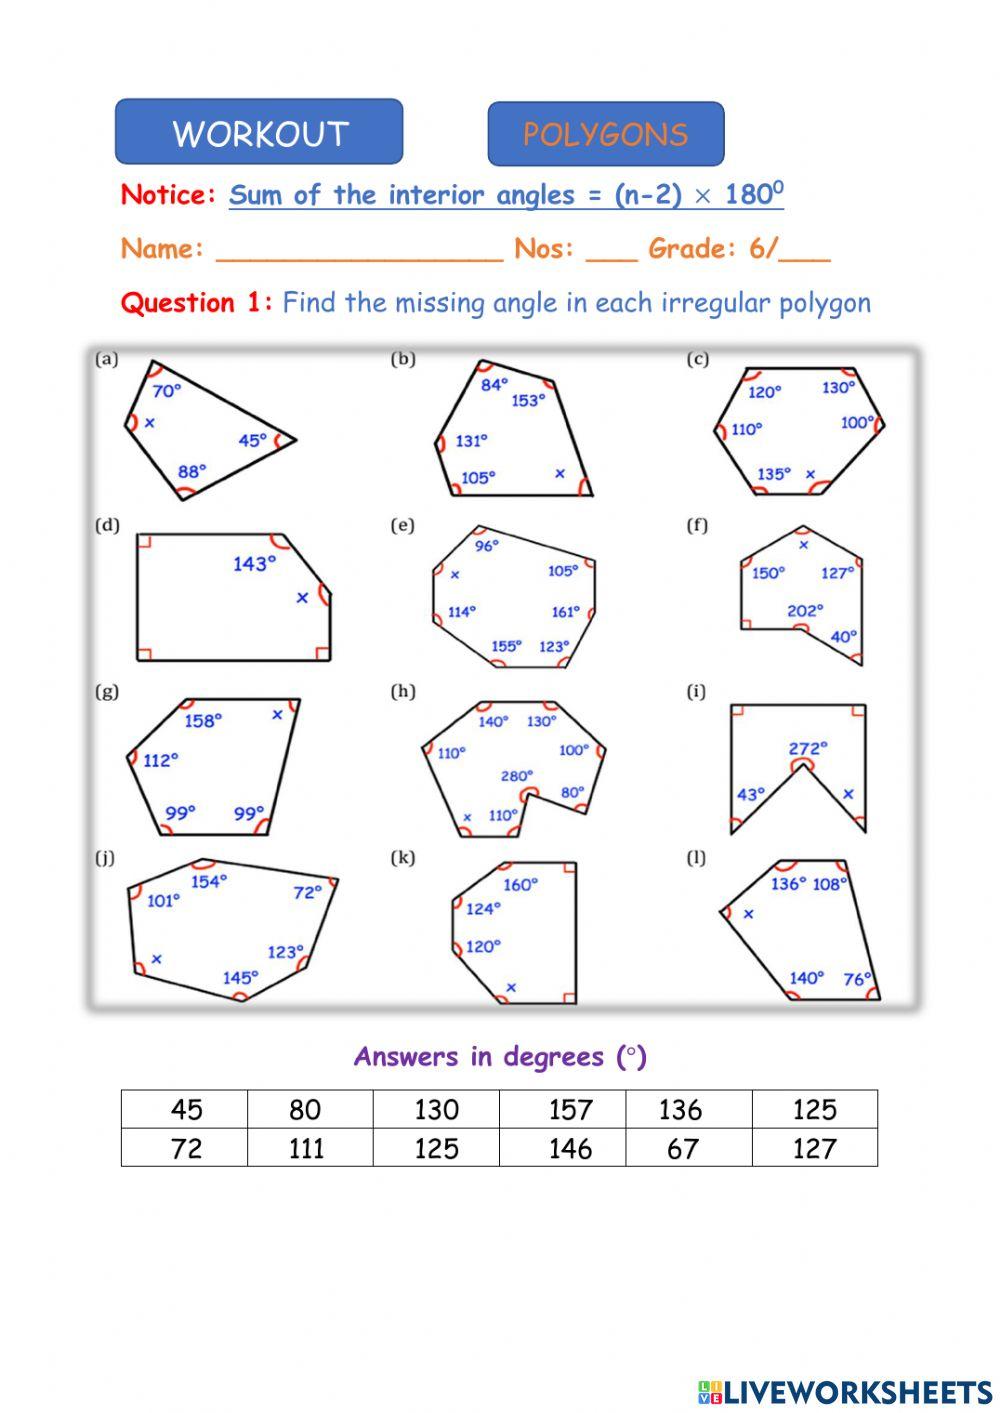 Polygons: Finding the missing angles G6